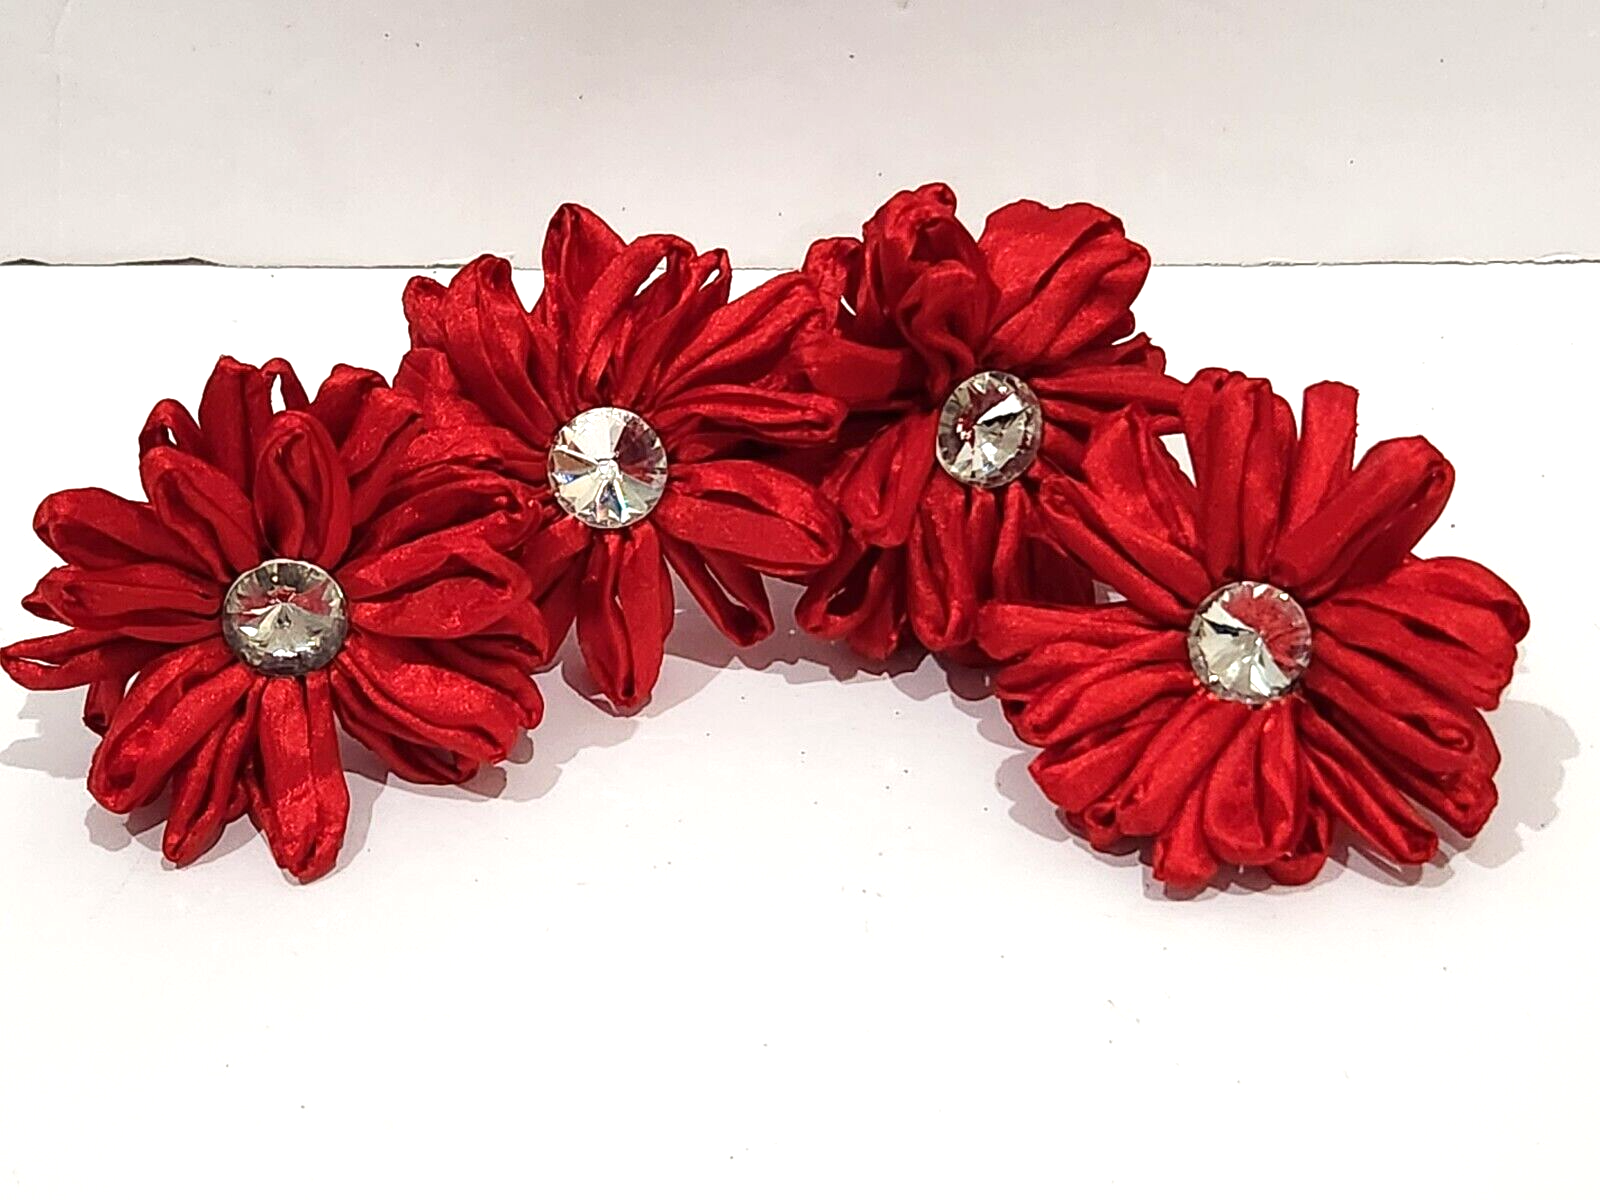 Primary image for Christmas Rhinestone Red Floral Napkin Rings Home Decor Set of 4